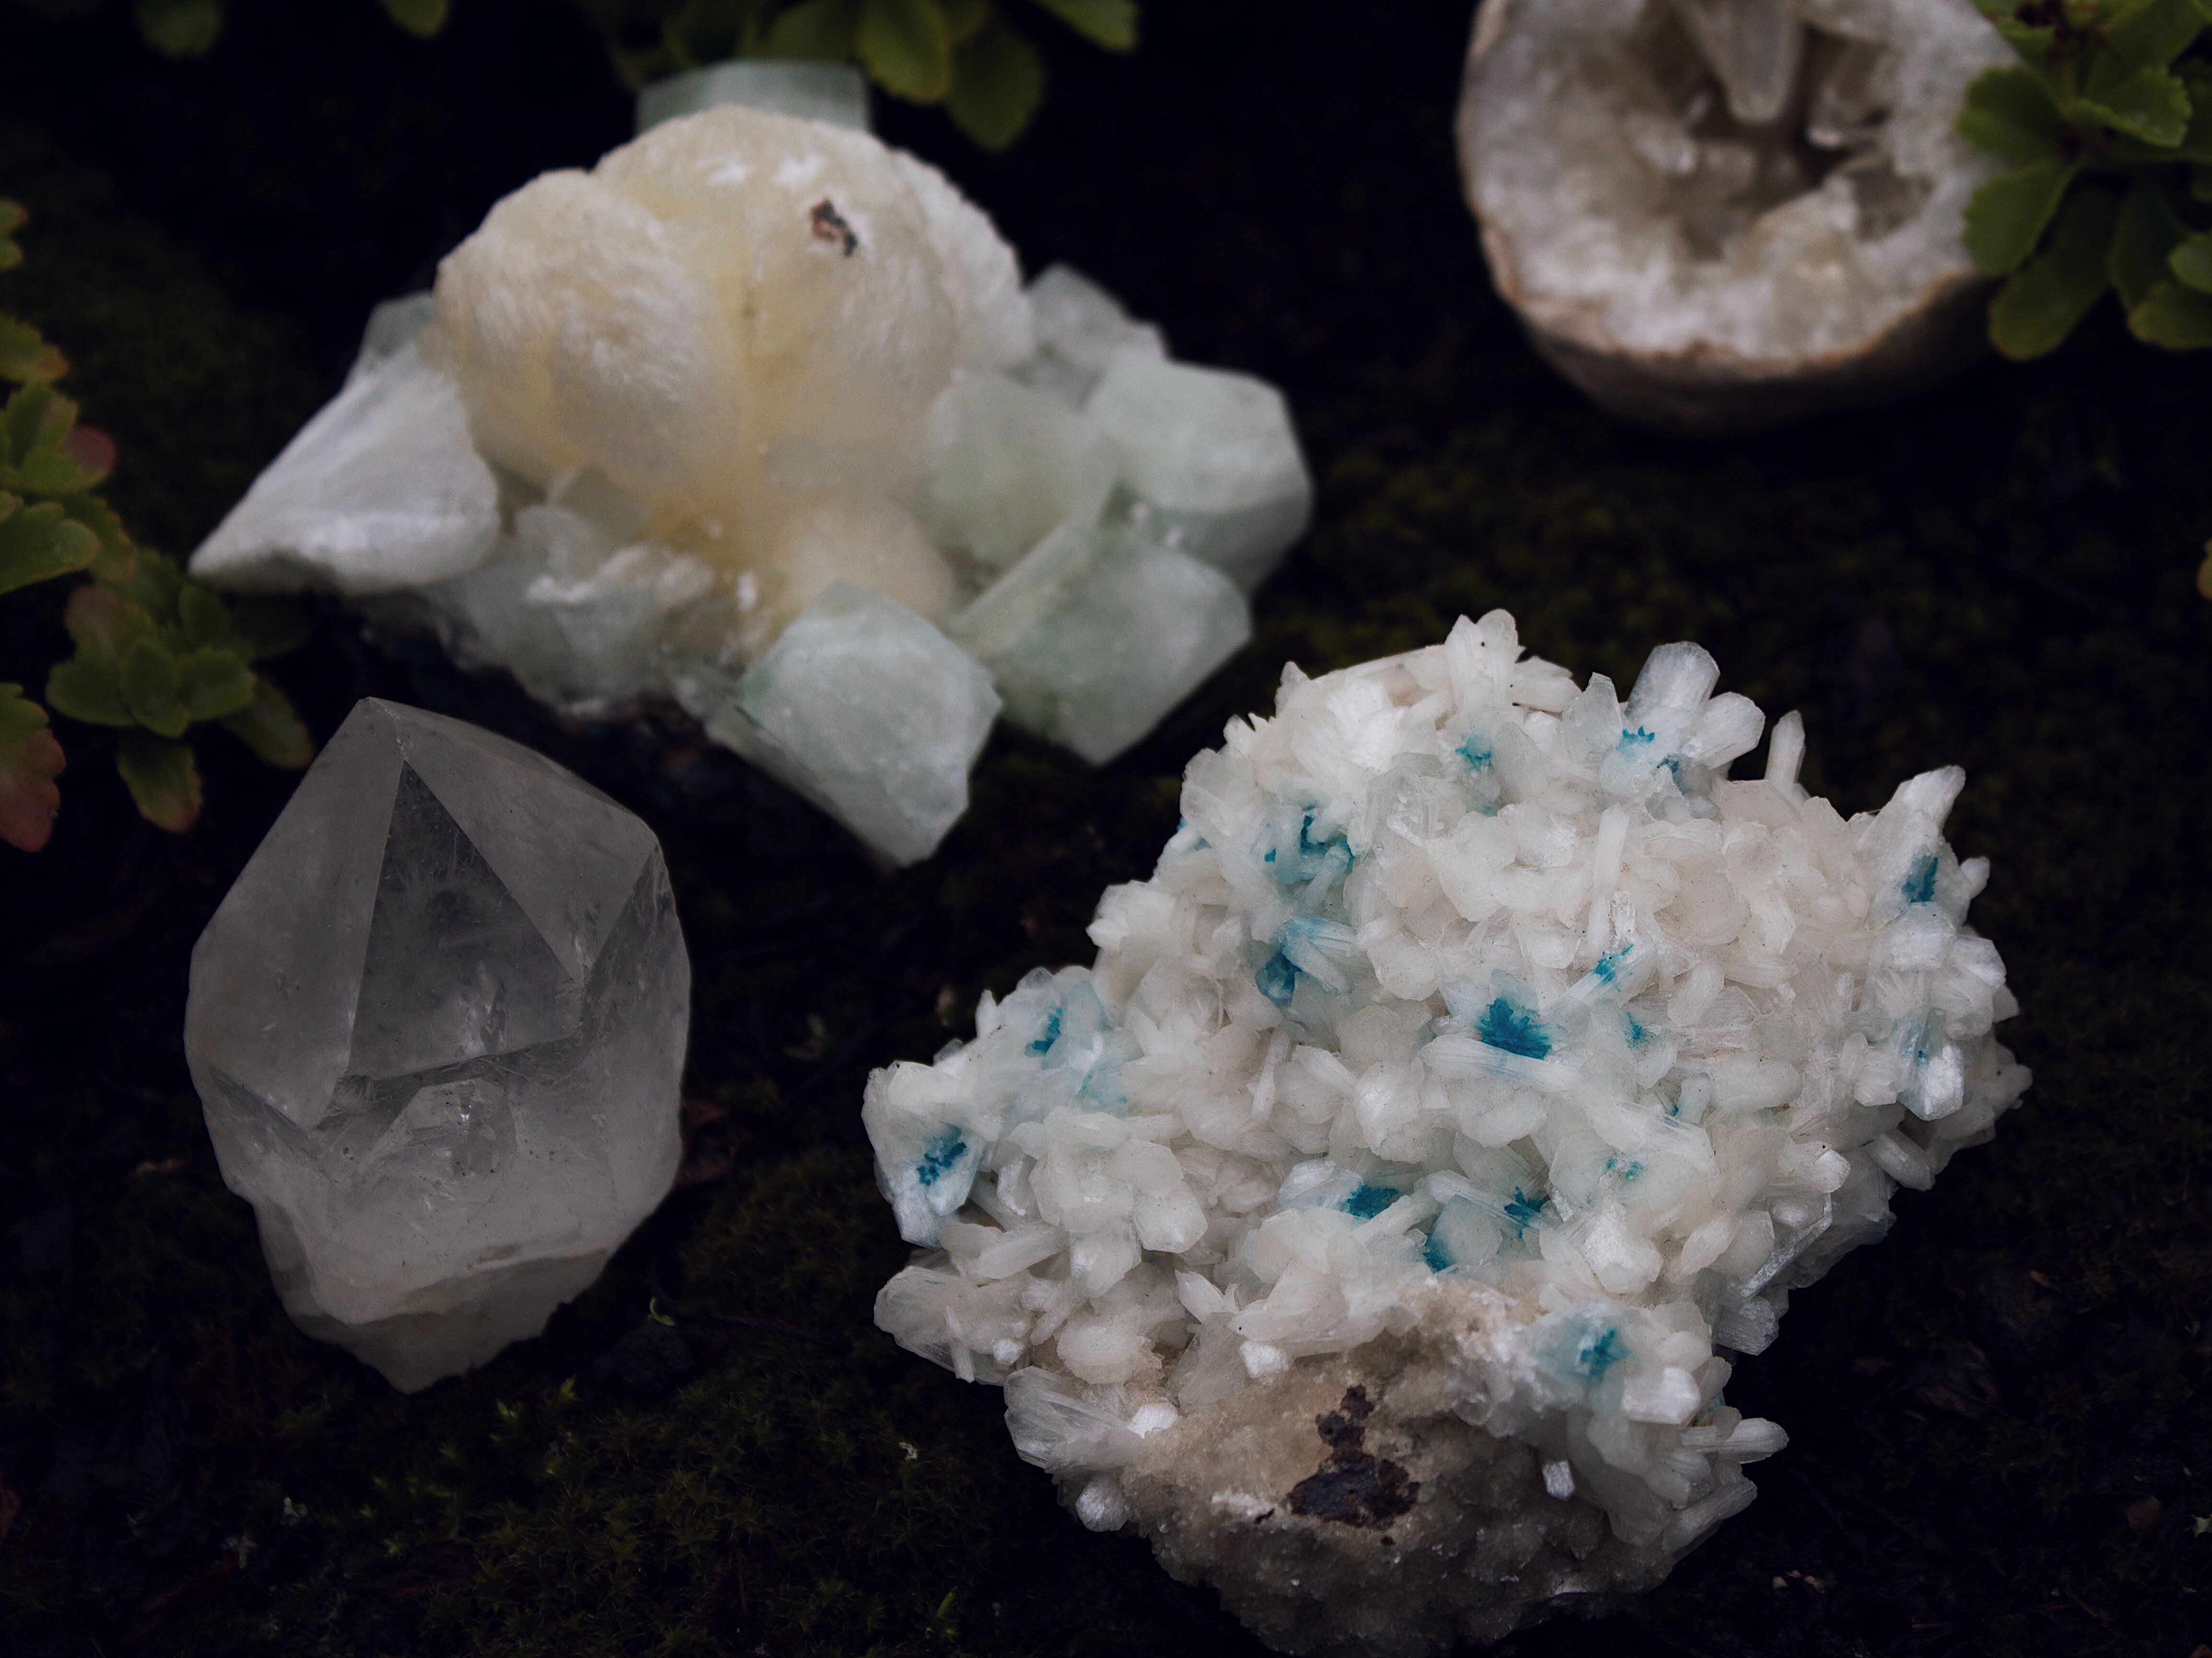 A Skeptic’s Guide to Using Crystals